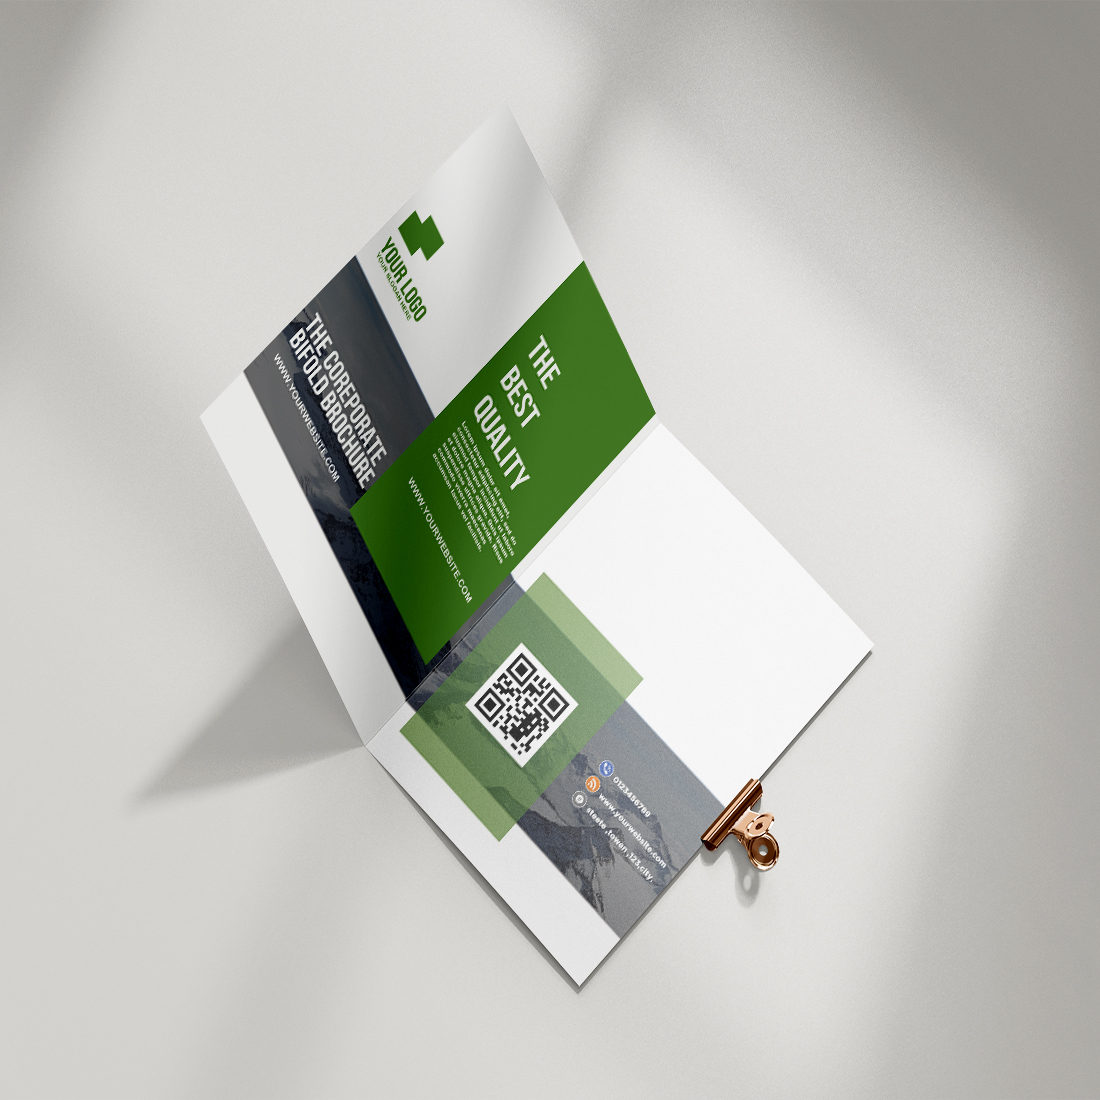 Green and white brochure with a key on it.